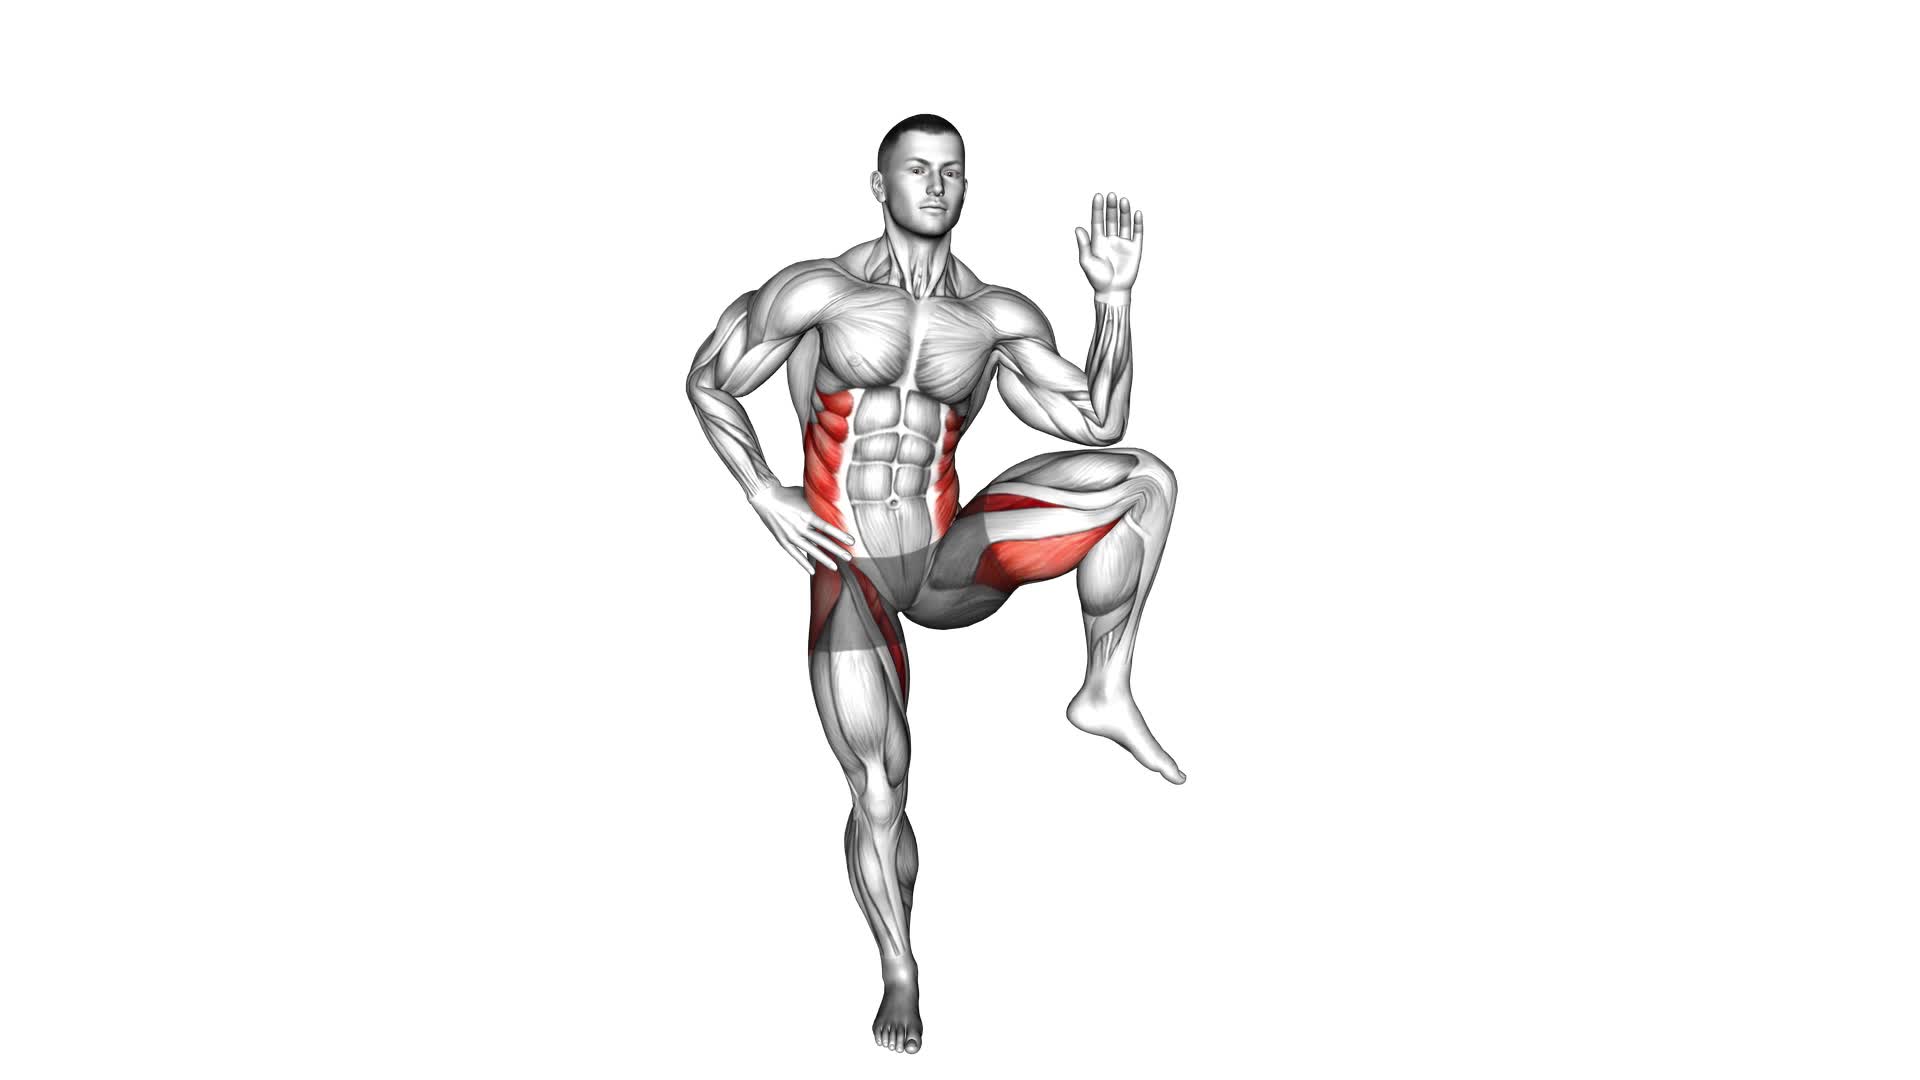 Standing Side Crunch Elbow to Knee (male) - Video Exercise Guide & Tips